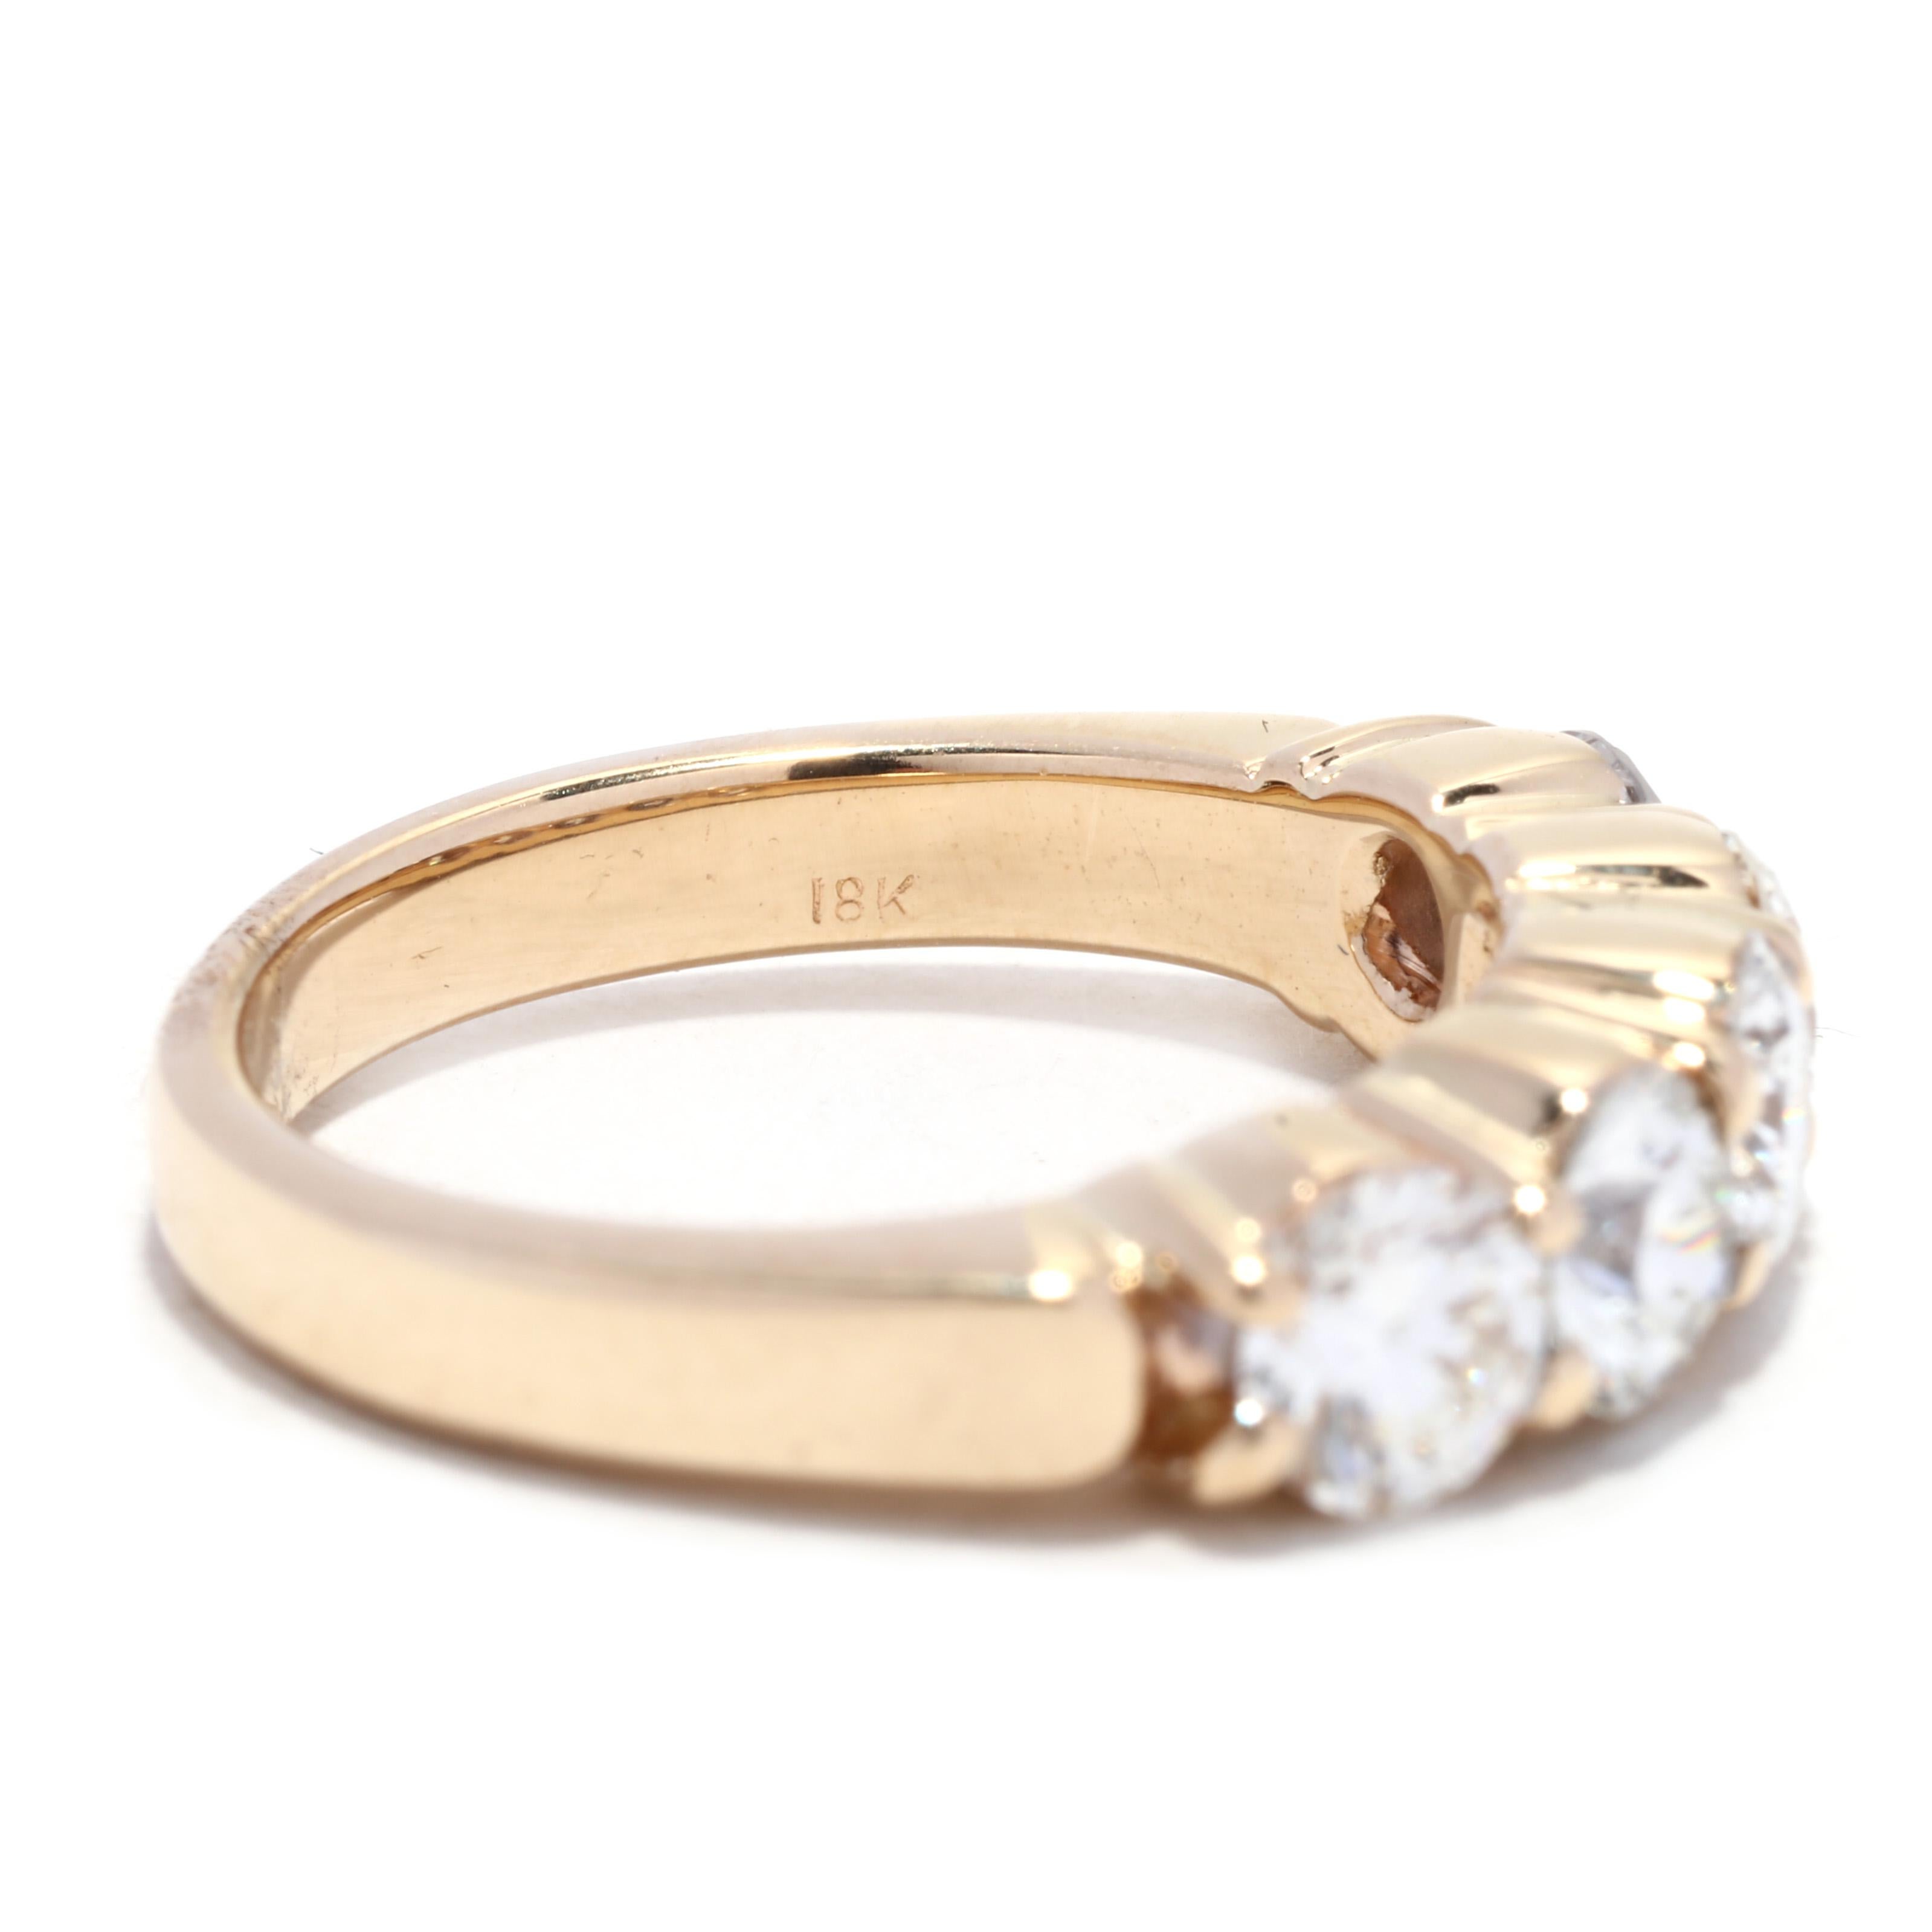 This 18K yellow gold stackable diamond wedding band ring features five shimmering gemstones for a truly radiant look. This 2 carat total weight ring features five diamonds, each with a color rating of G-H and clarity of SI1-SI2, delicately set in an